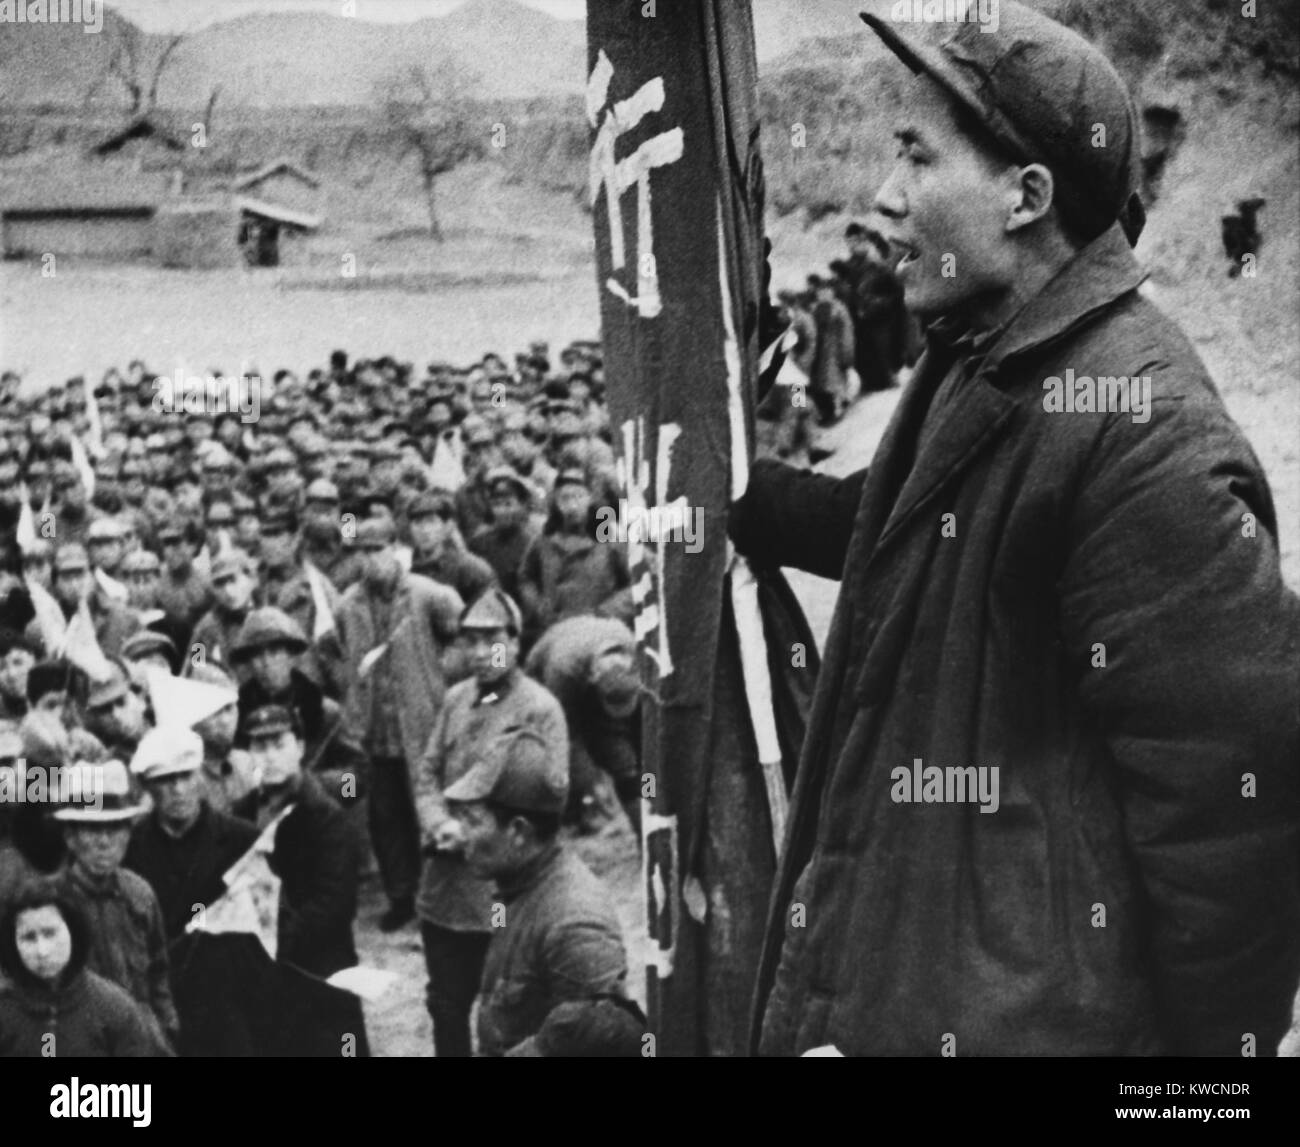 Mao Zedong, leader of China's Communists, addresses some of his followers. At this time the Communist armies controlled 80 million people in northern China. Ca. Nov. 1944. - (BSLOC 2014 15 161) Stock Photo